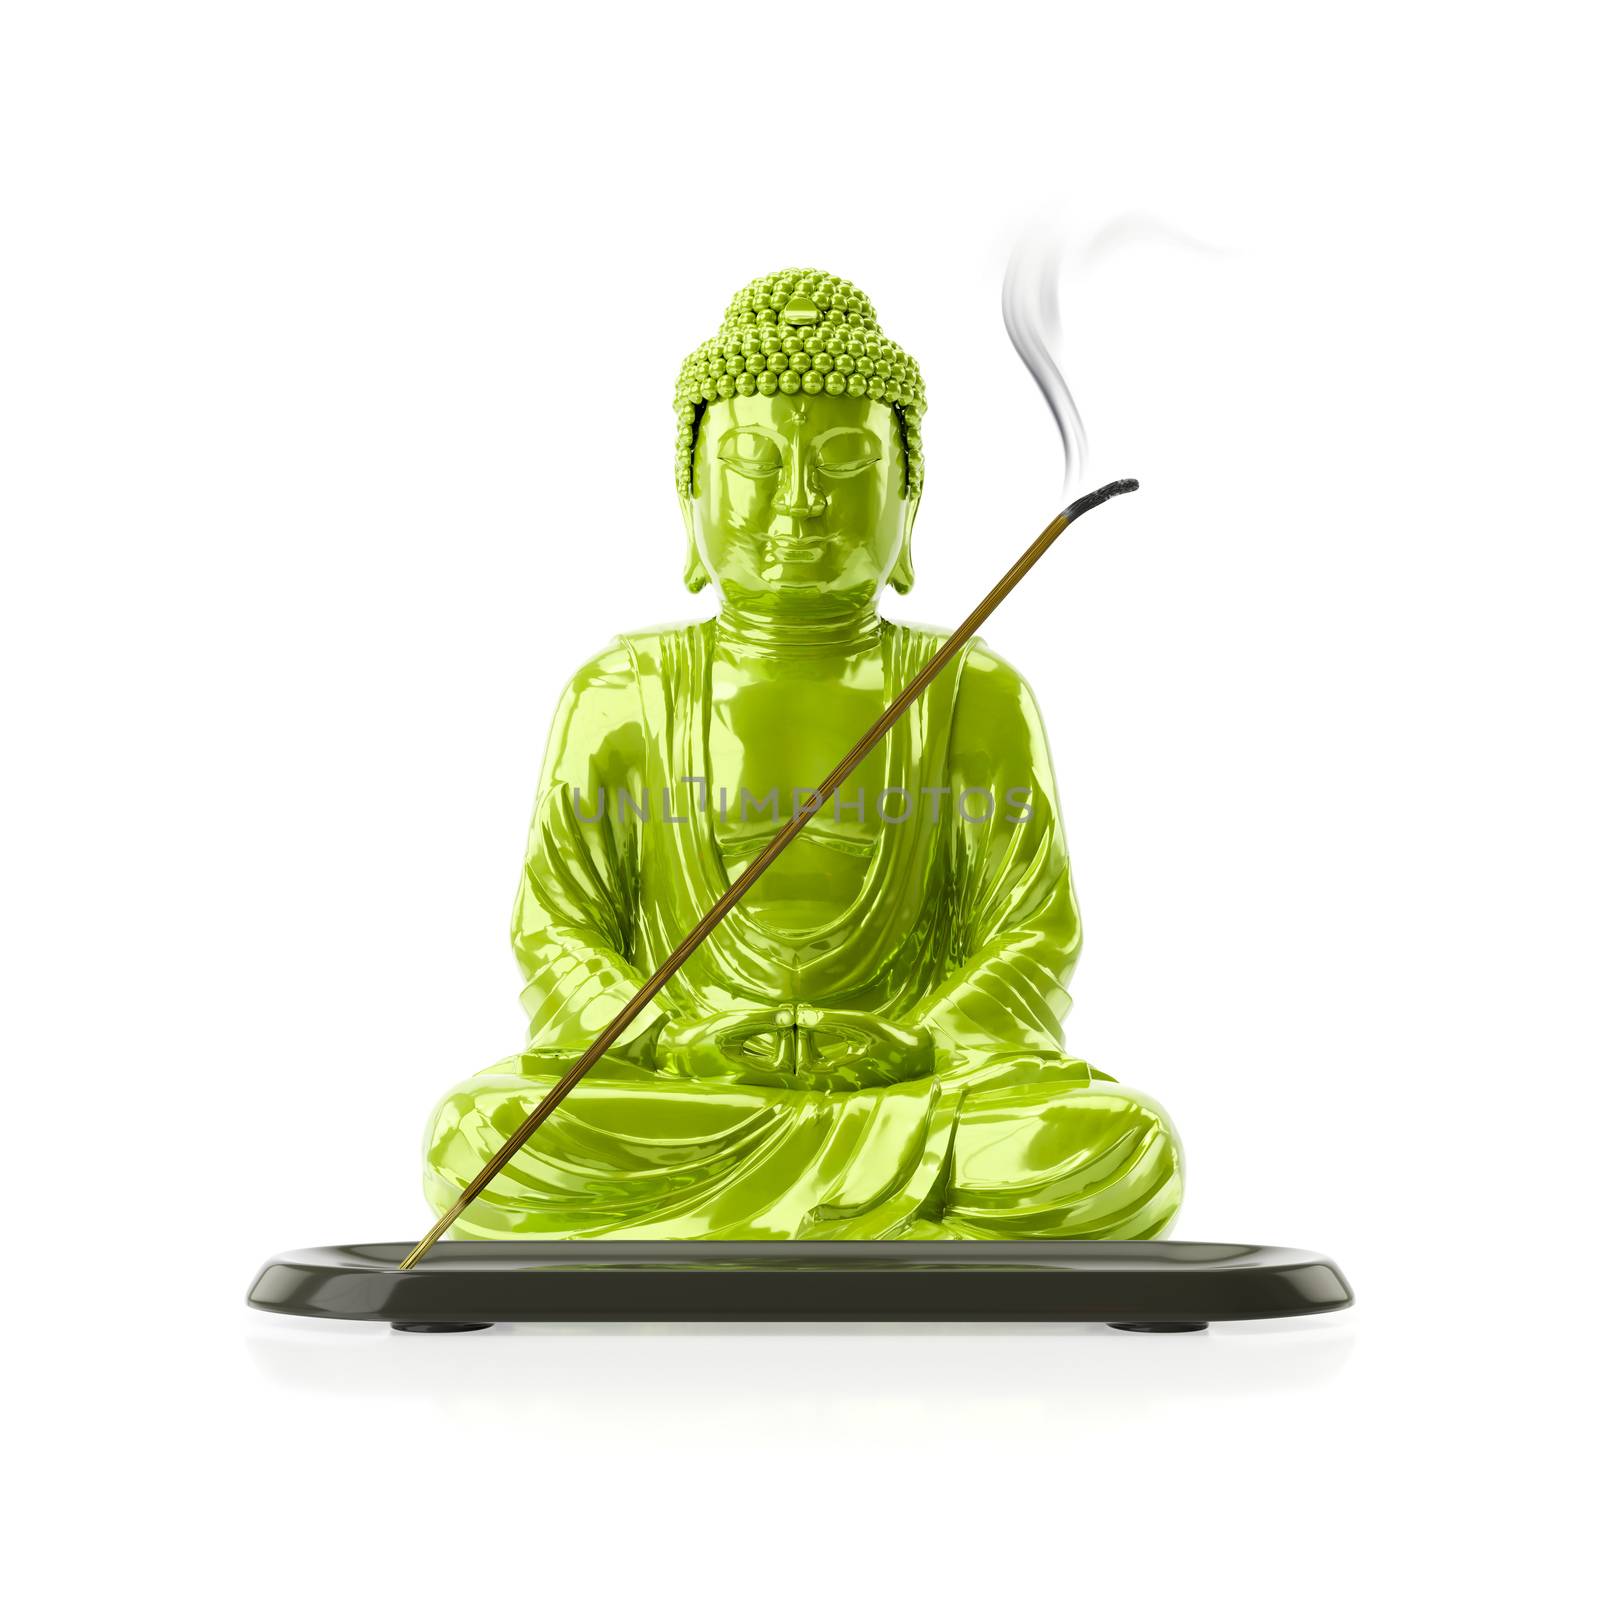 3d illustration of a Buddha with a incense stick